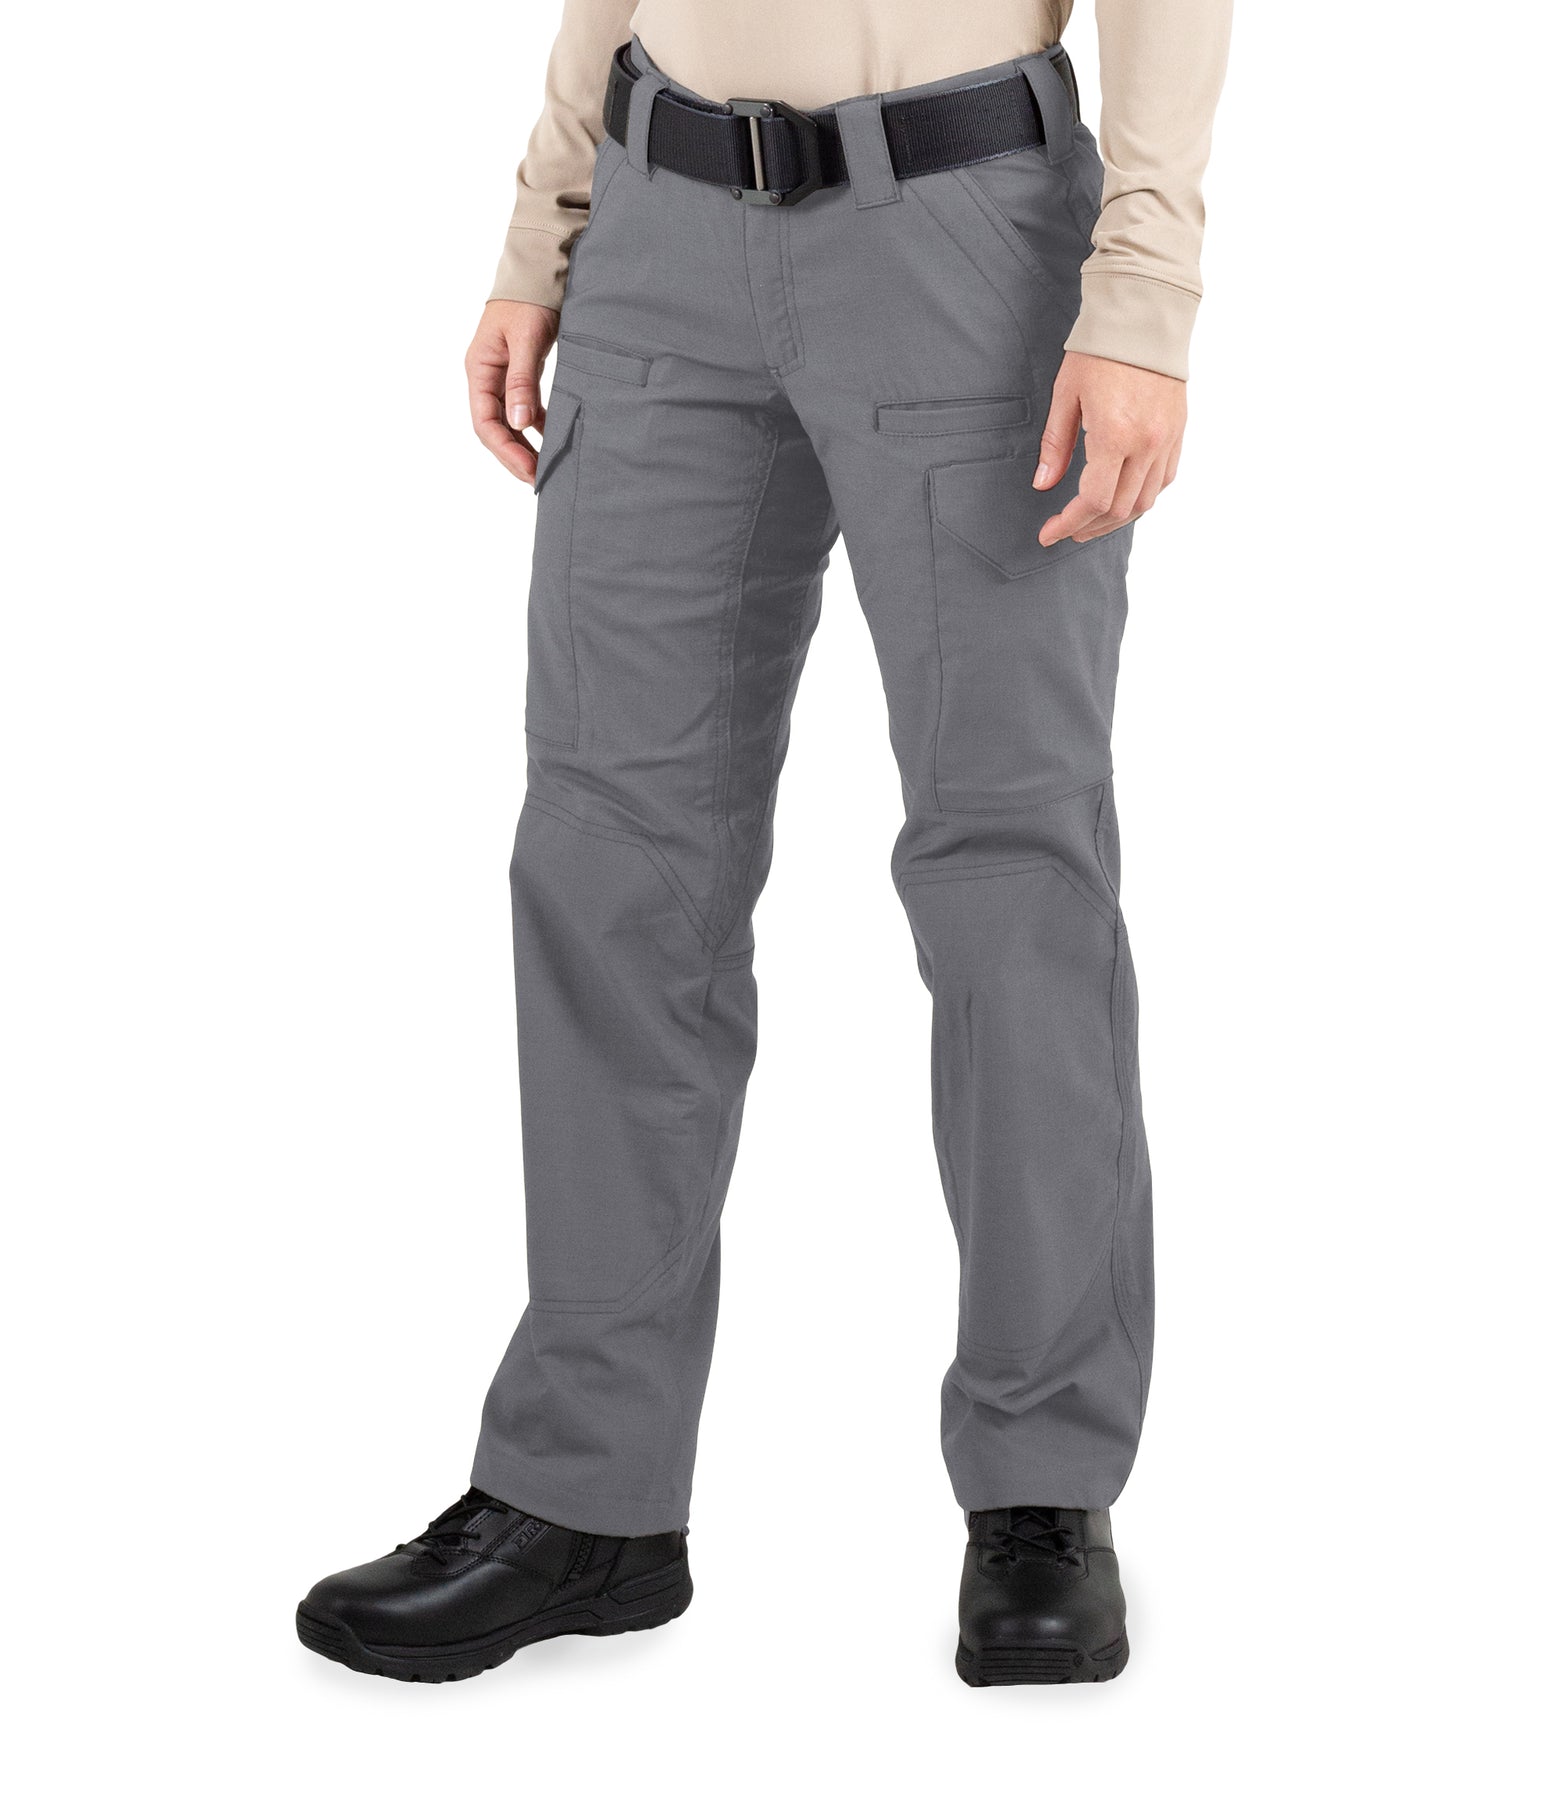 Women's V2 Tactical Pants / Wolf Grey – First Tactical